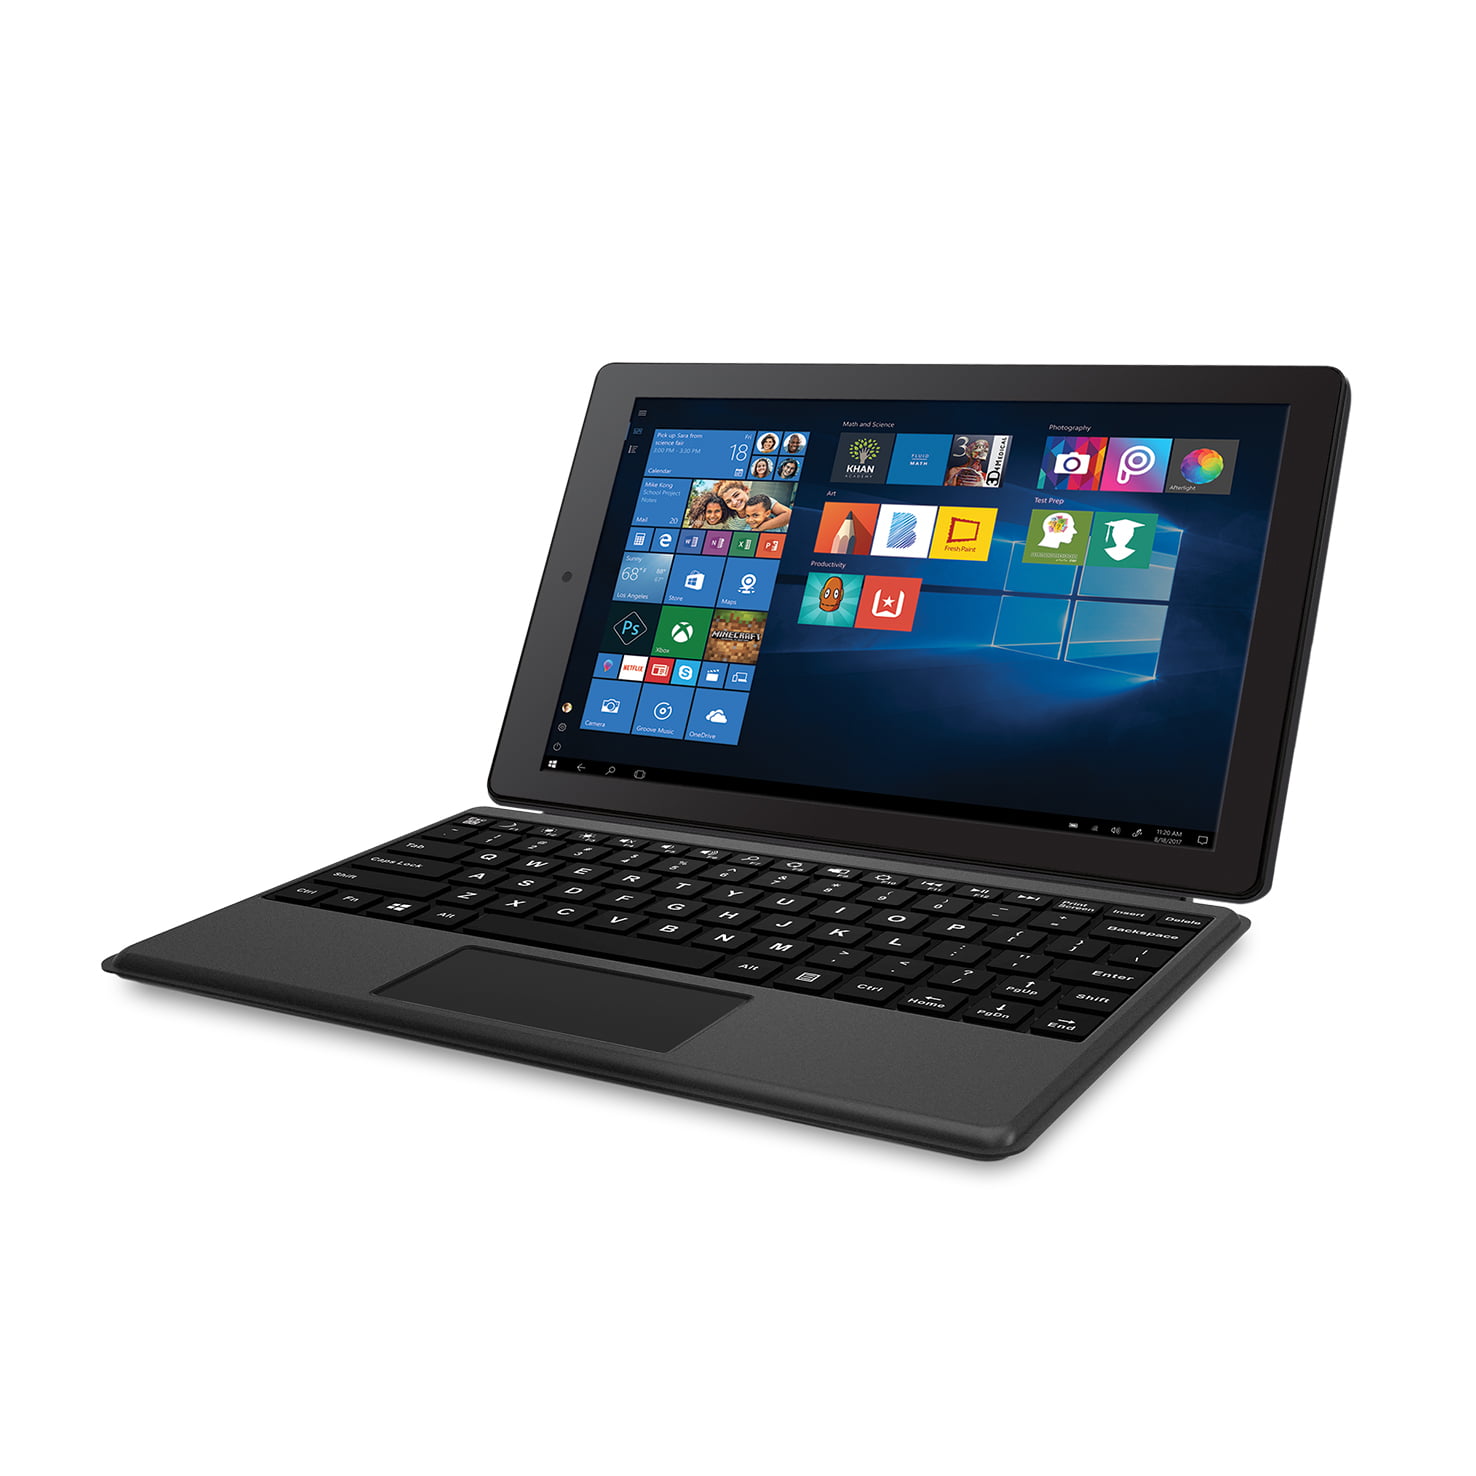 Rca Cambio 10 1 2 In 1 Windows Tablet Keyboard Charcoal Walmart Com Walmart Com - trying to play roblox on the windows tablet